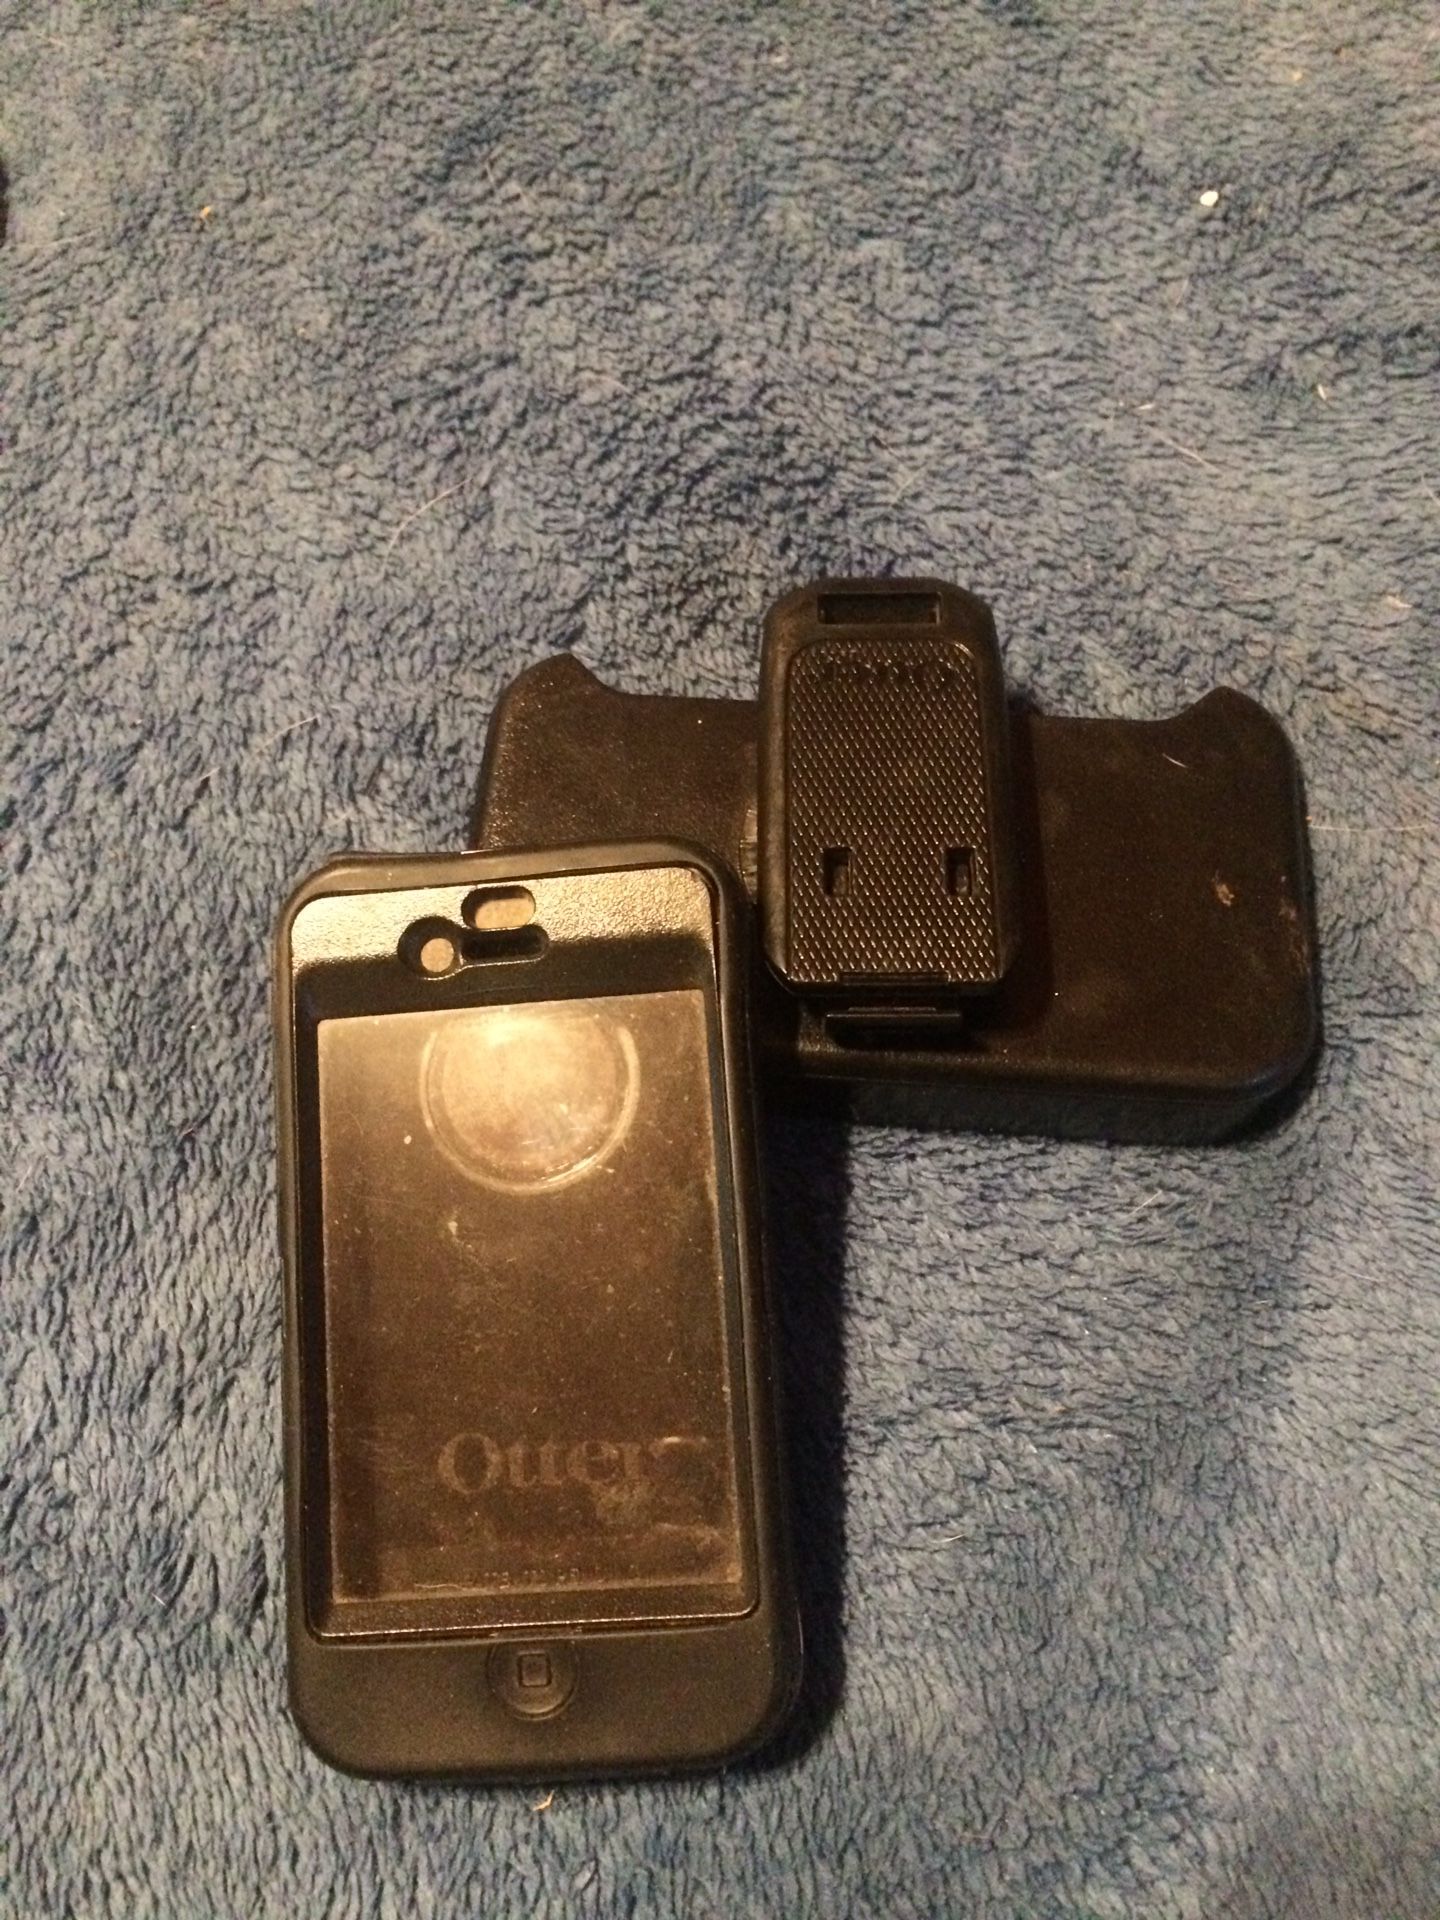 iPhone 4 otter box and belt clip